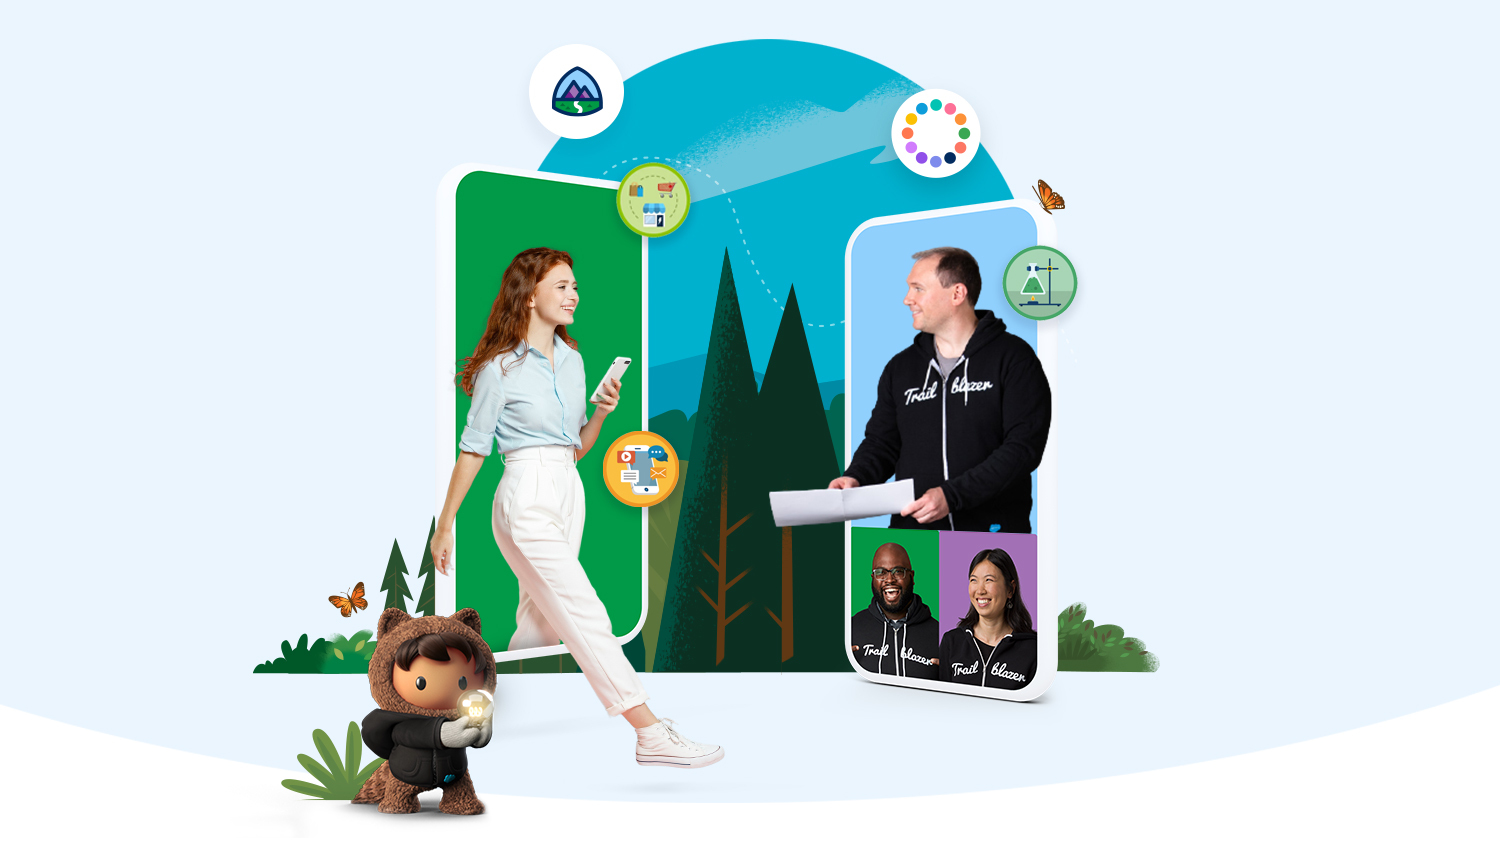 Salesforce Conference Connects Marketers, Commerce and Digital Pros With In-Person and Digital Experiences